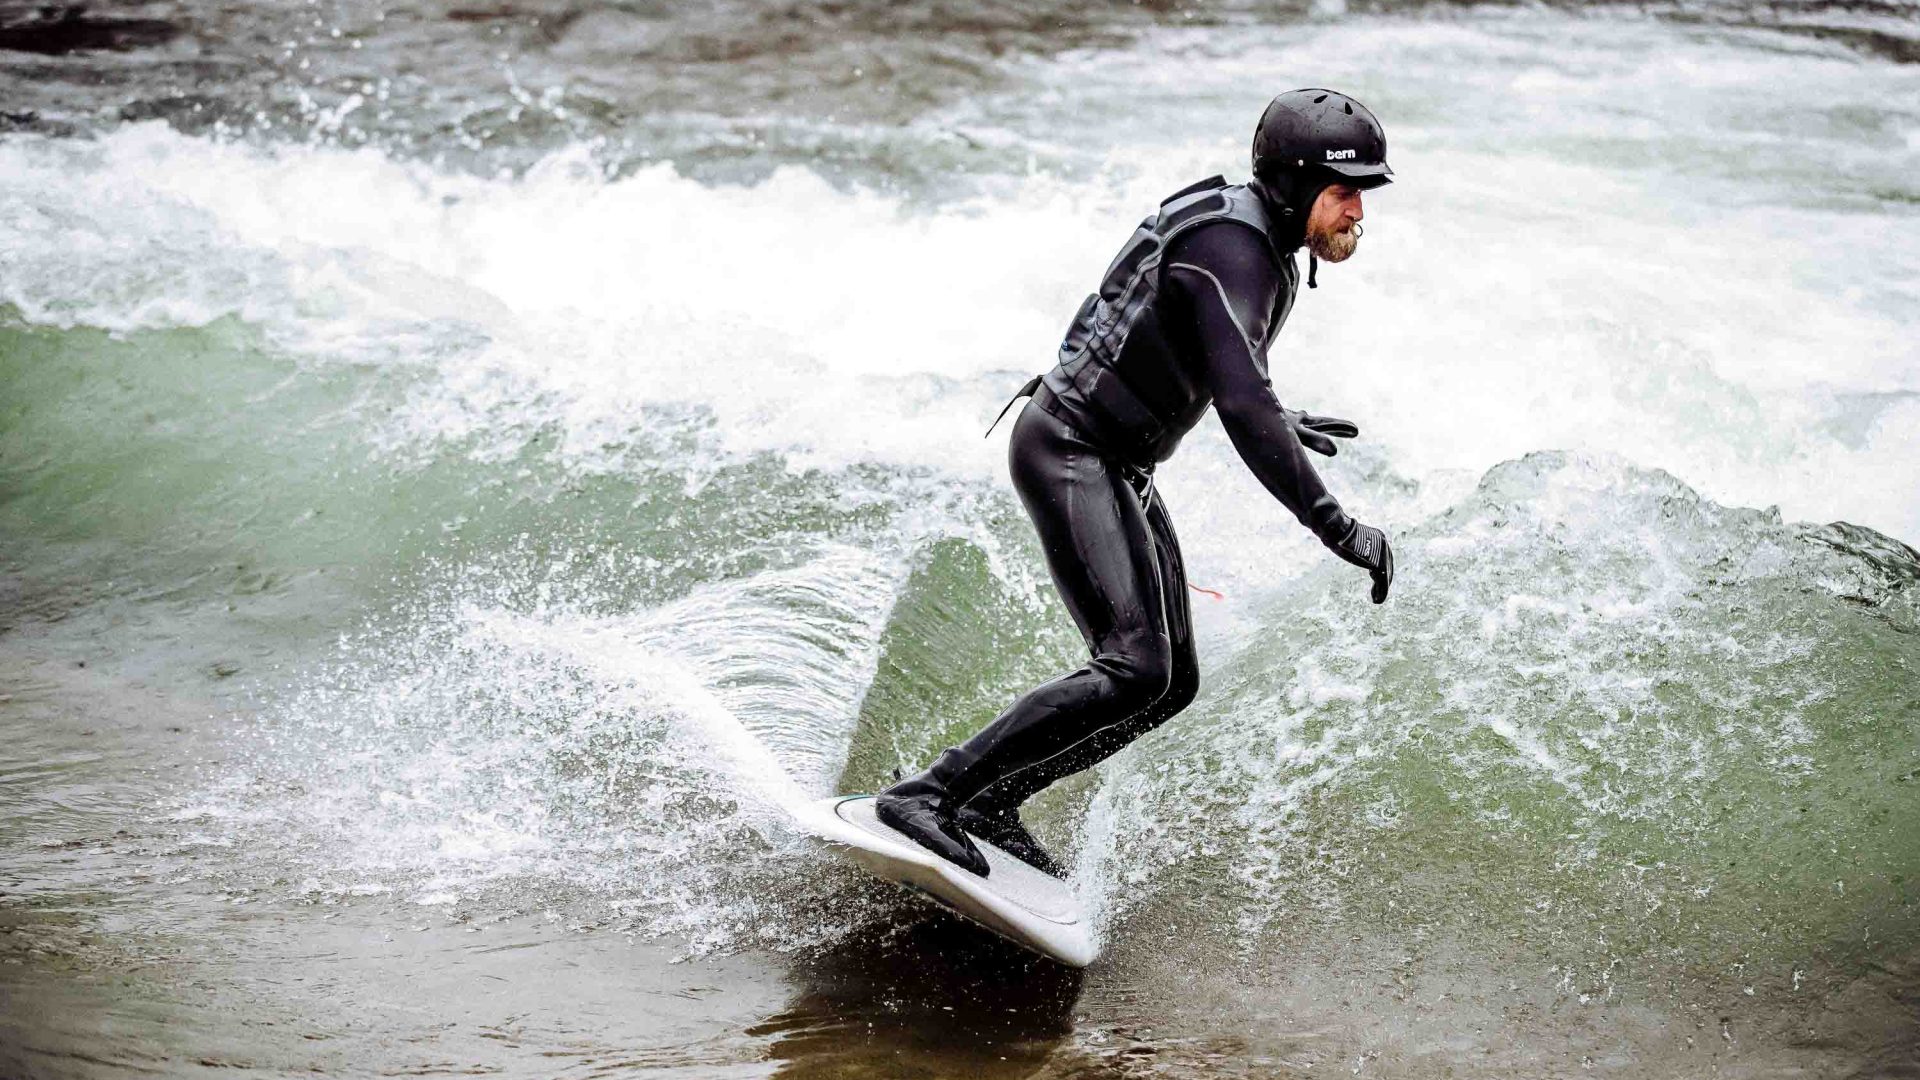 A man surfs on a river. He wears a full wetsuit and helmet.